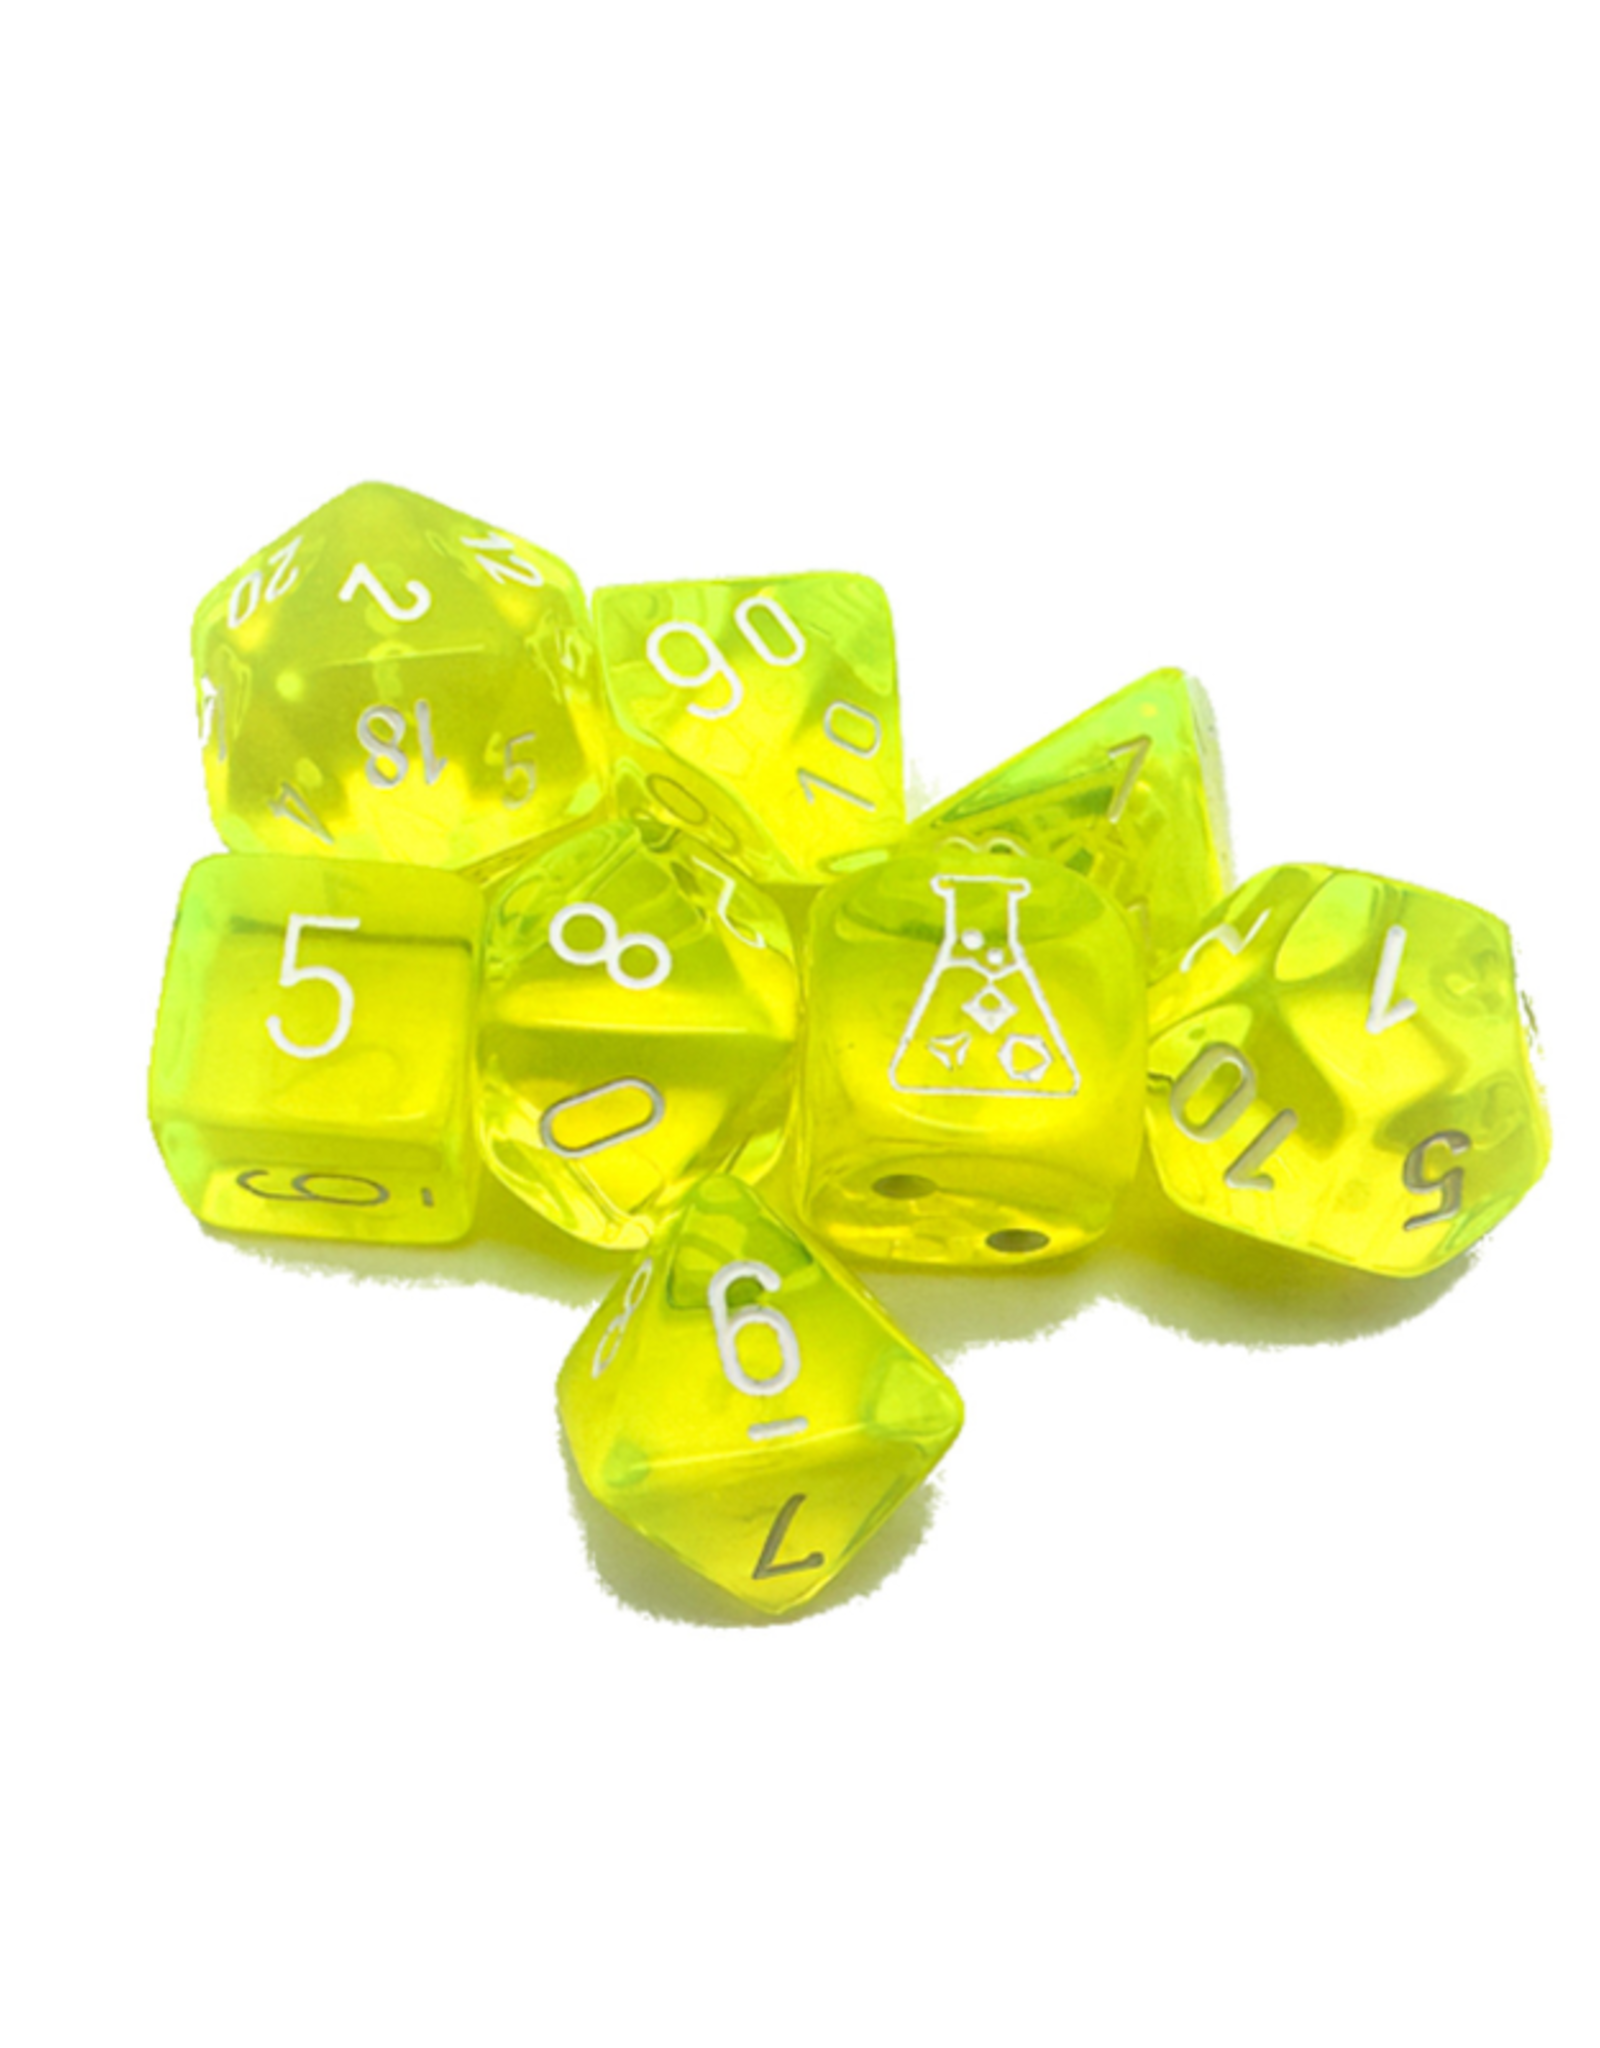 Polyhedral Dice Set: Lab Dice -Neon Yellow/White